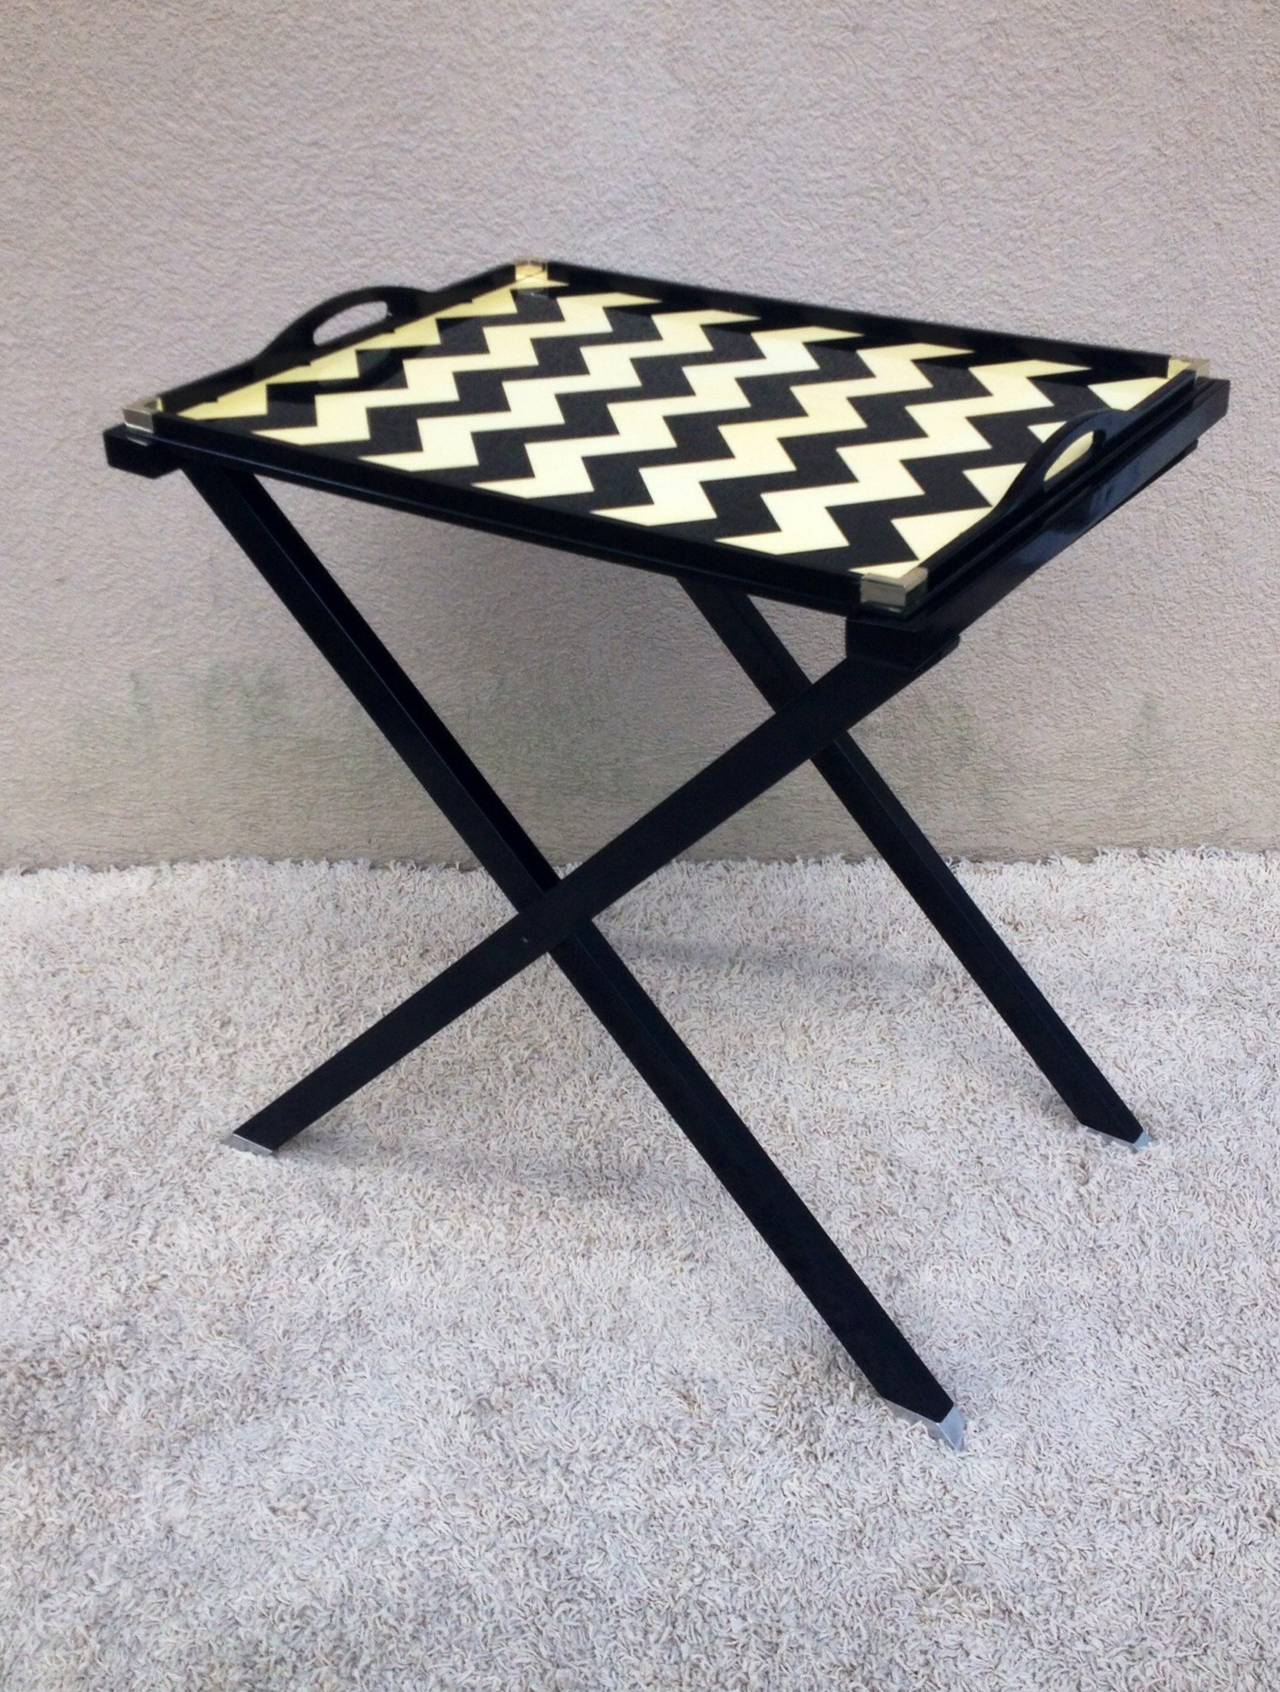 Oscar De La Renta black and crème lacquered tray table with stand, Lunt Silver corners and feet.